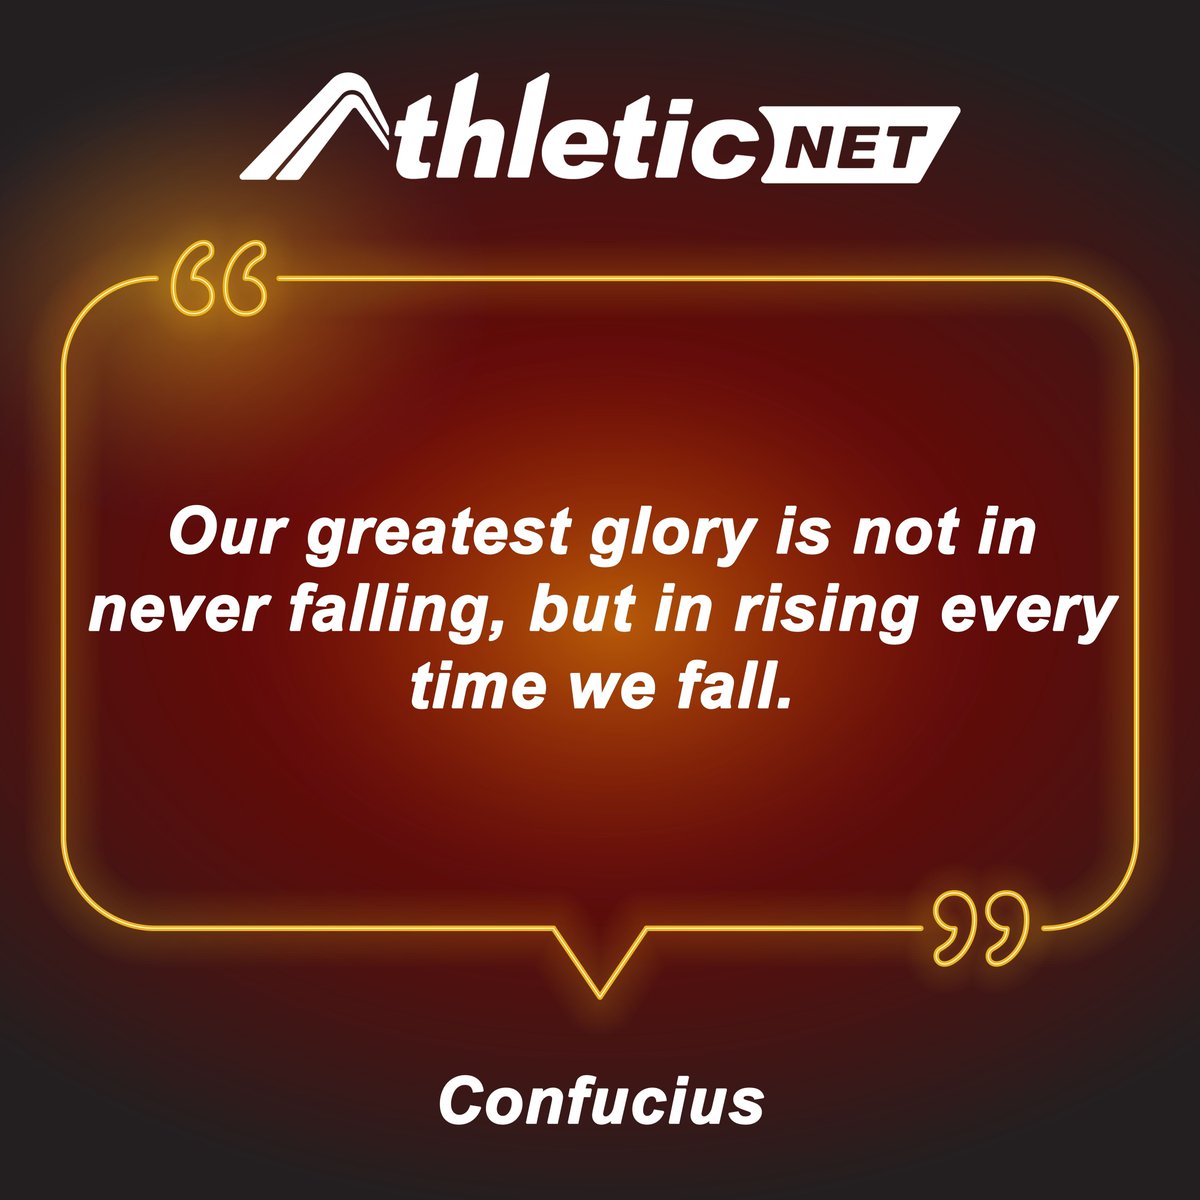 'Our greatest glory is not in never falling, but in rising every time we fall.'
- Confucius